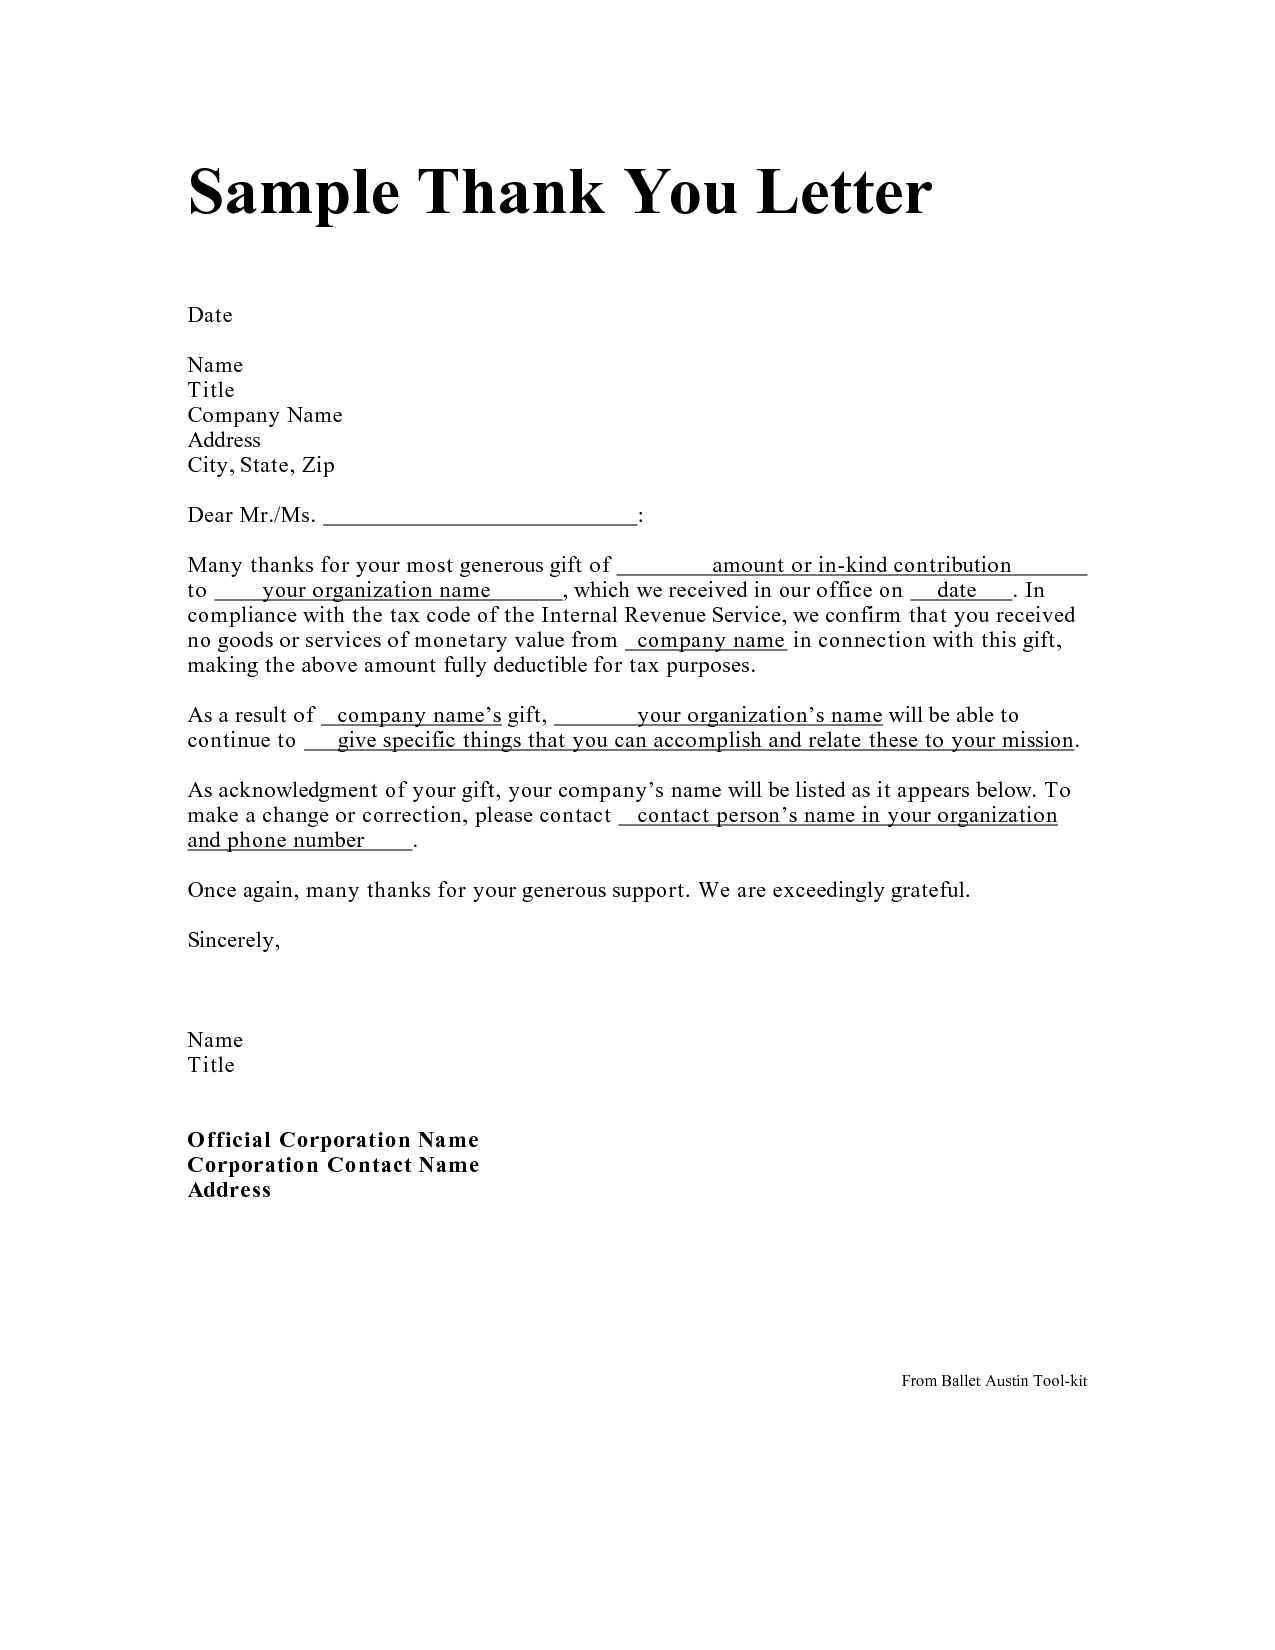 Personal Loan Template Letter - Personal Thank You Letter Personal Thank You Letter Samples